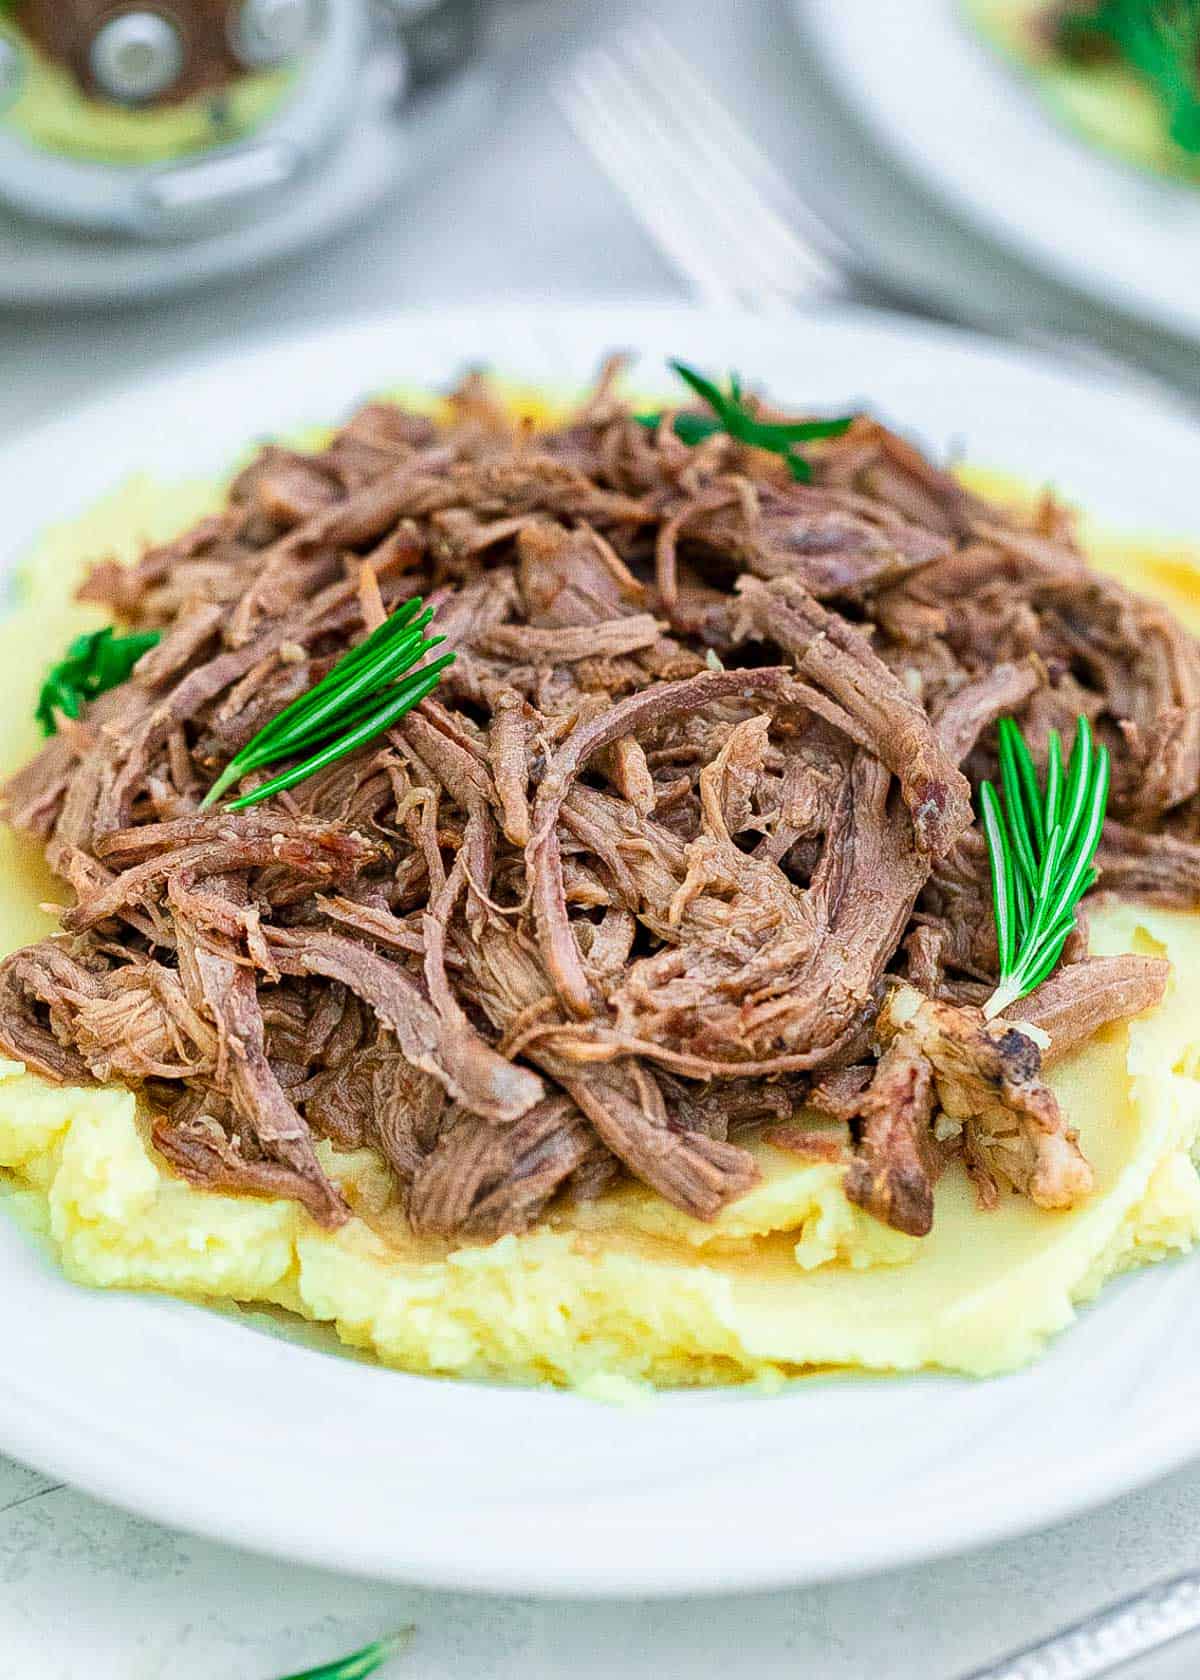 Crockpot tri tip roast shredded and piled on top of mashed potatoes on a white plate with fresh rosemary garnish.